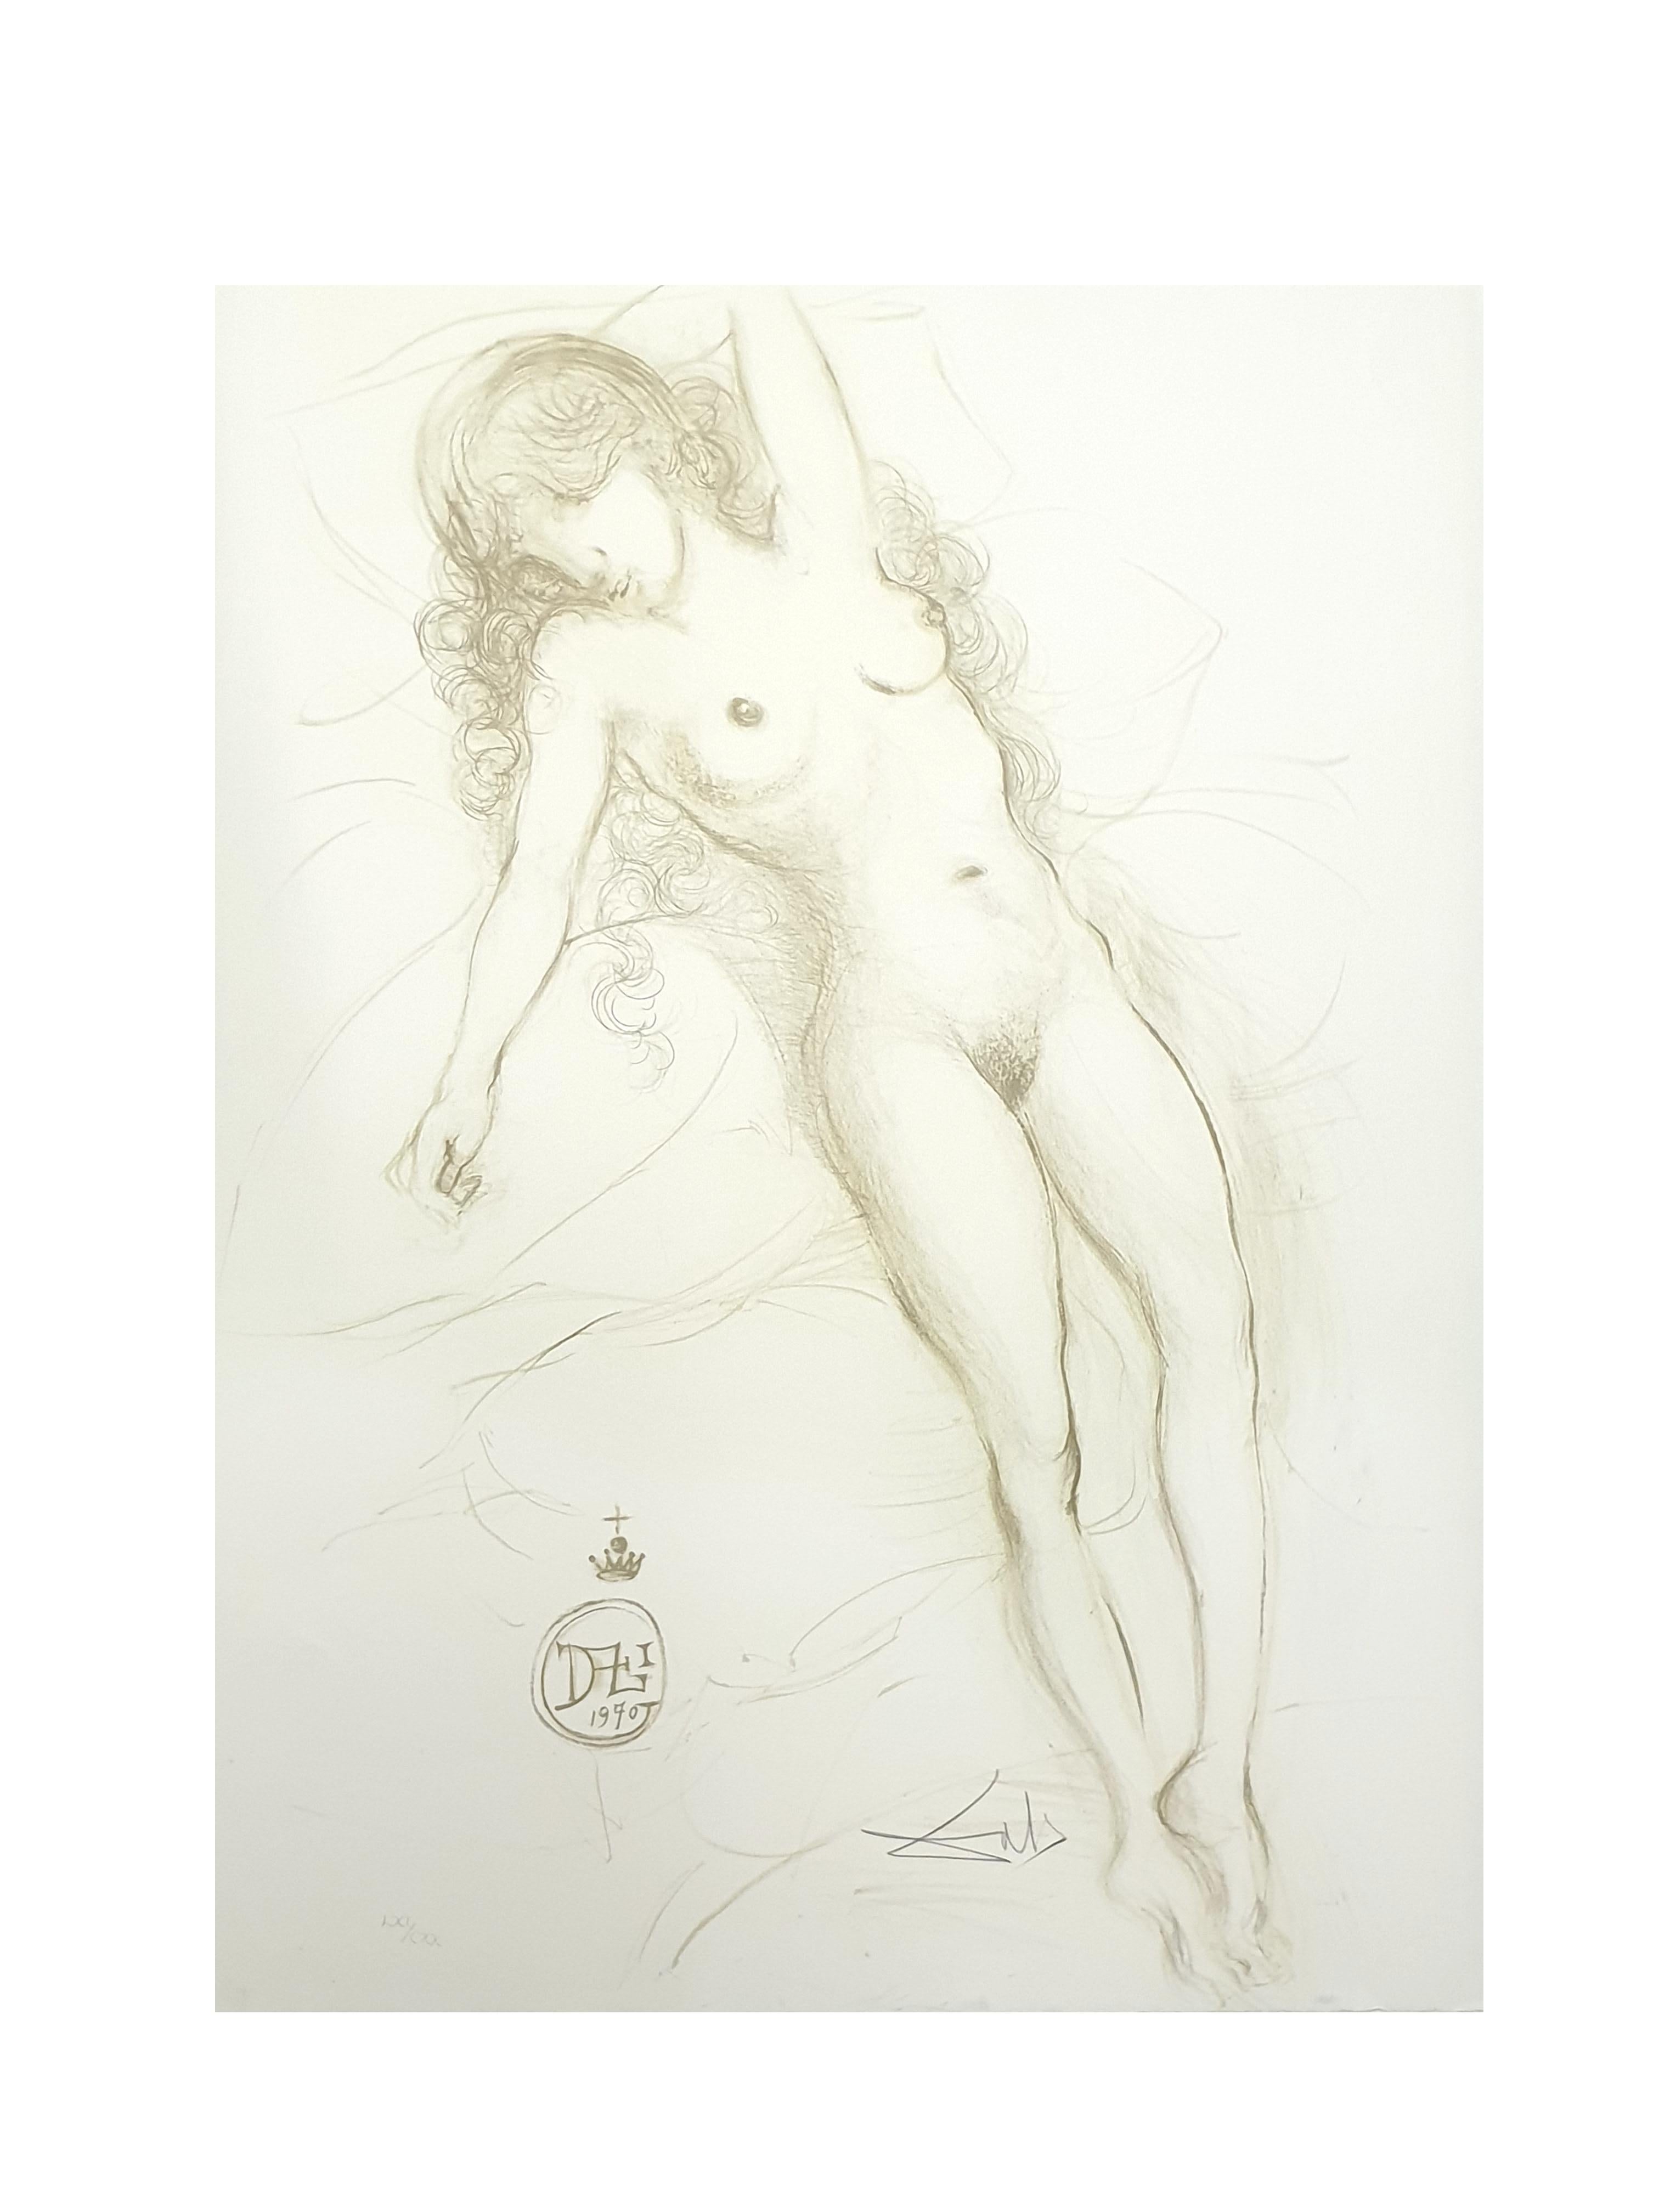 Salvador Dali - Nude with Raised Arms - Lithograph - Print by Salvador Dalí